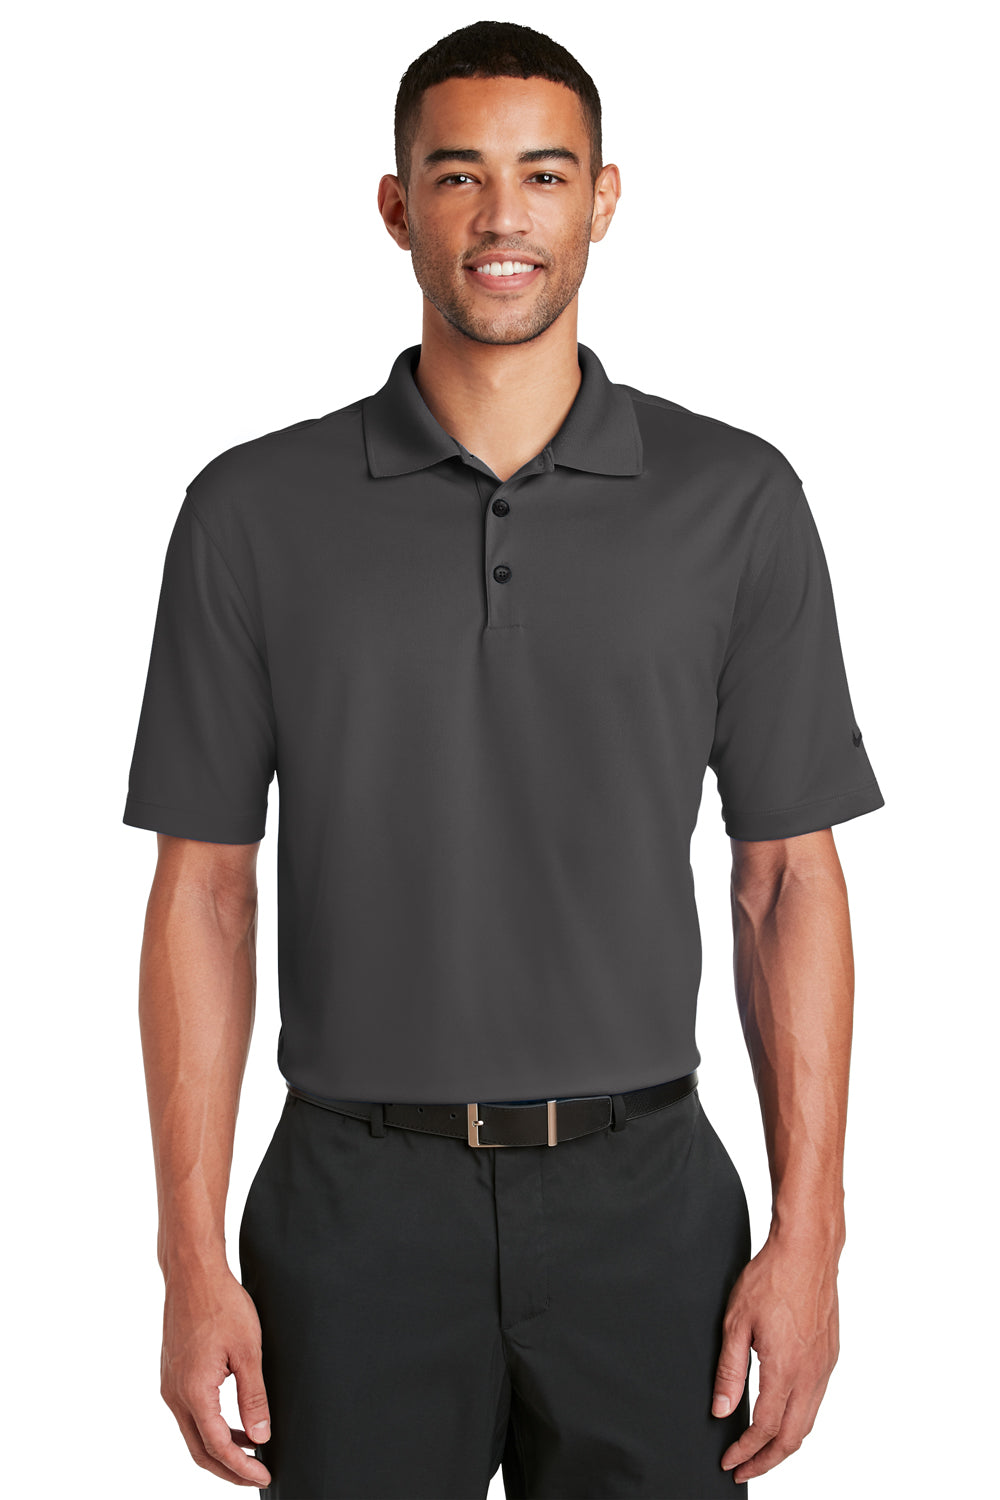 Nike Mens Dri-Fit Moisture Wicking Short Sleeve Polo Shirt - Anthracite Grey (DISCONTINUED)